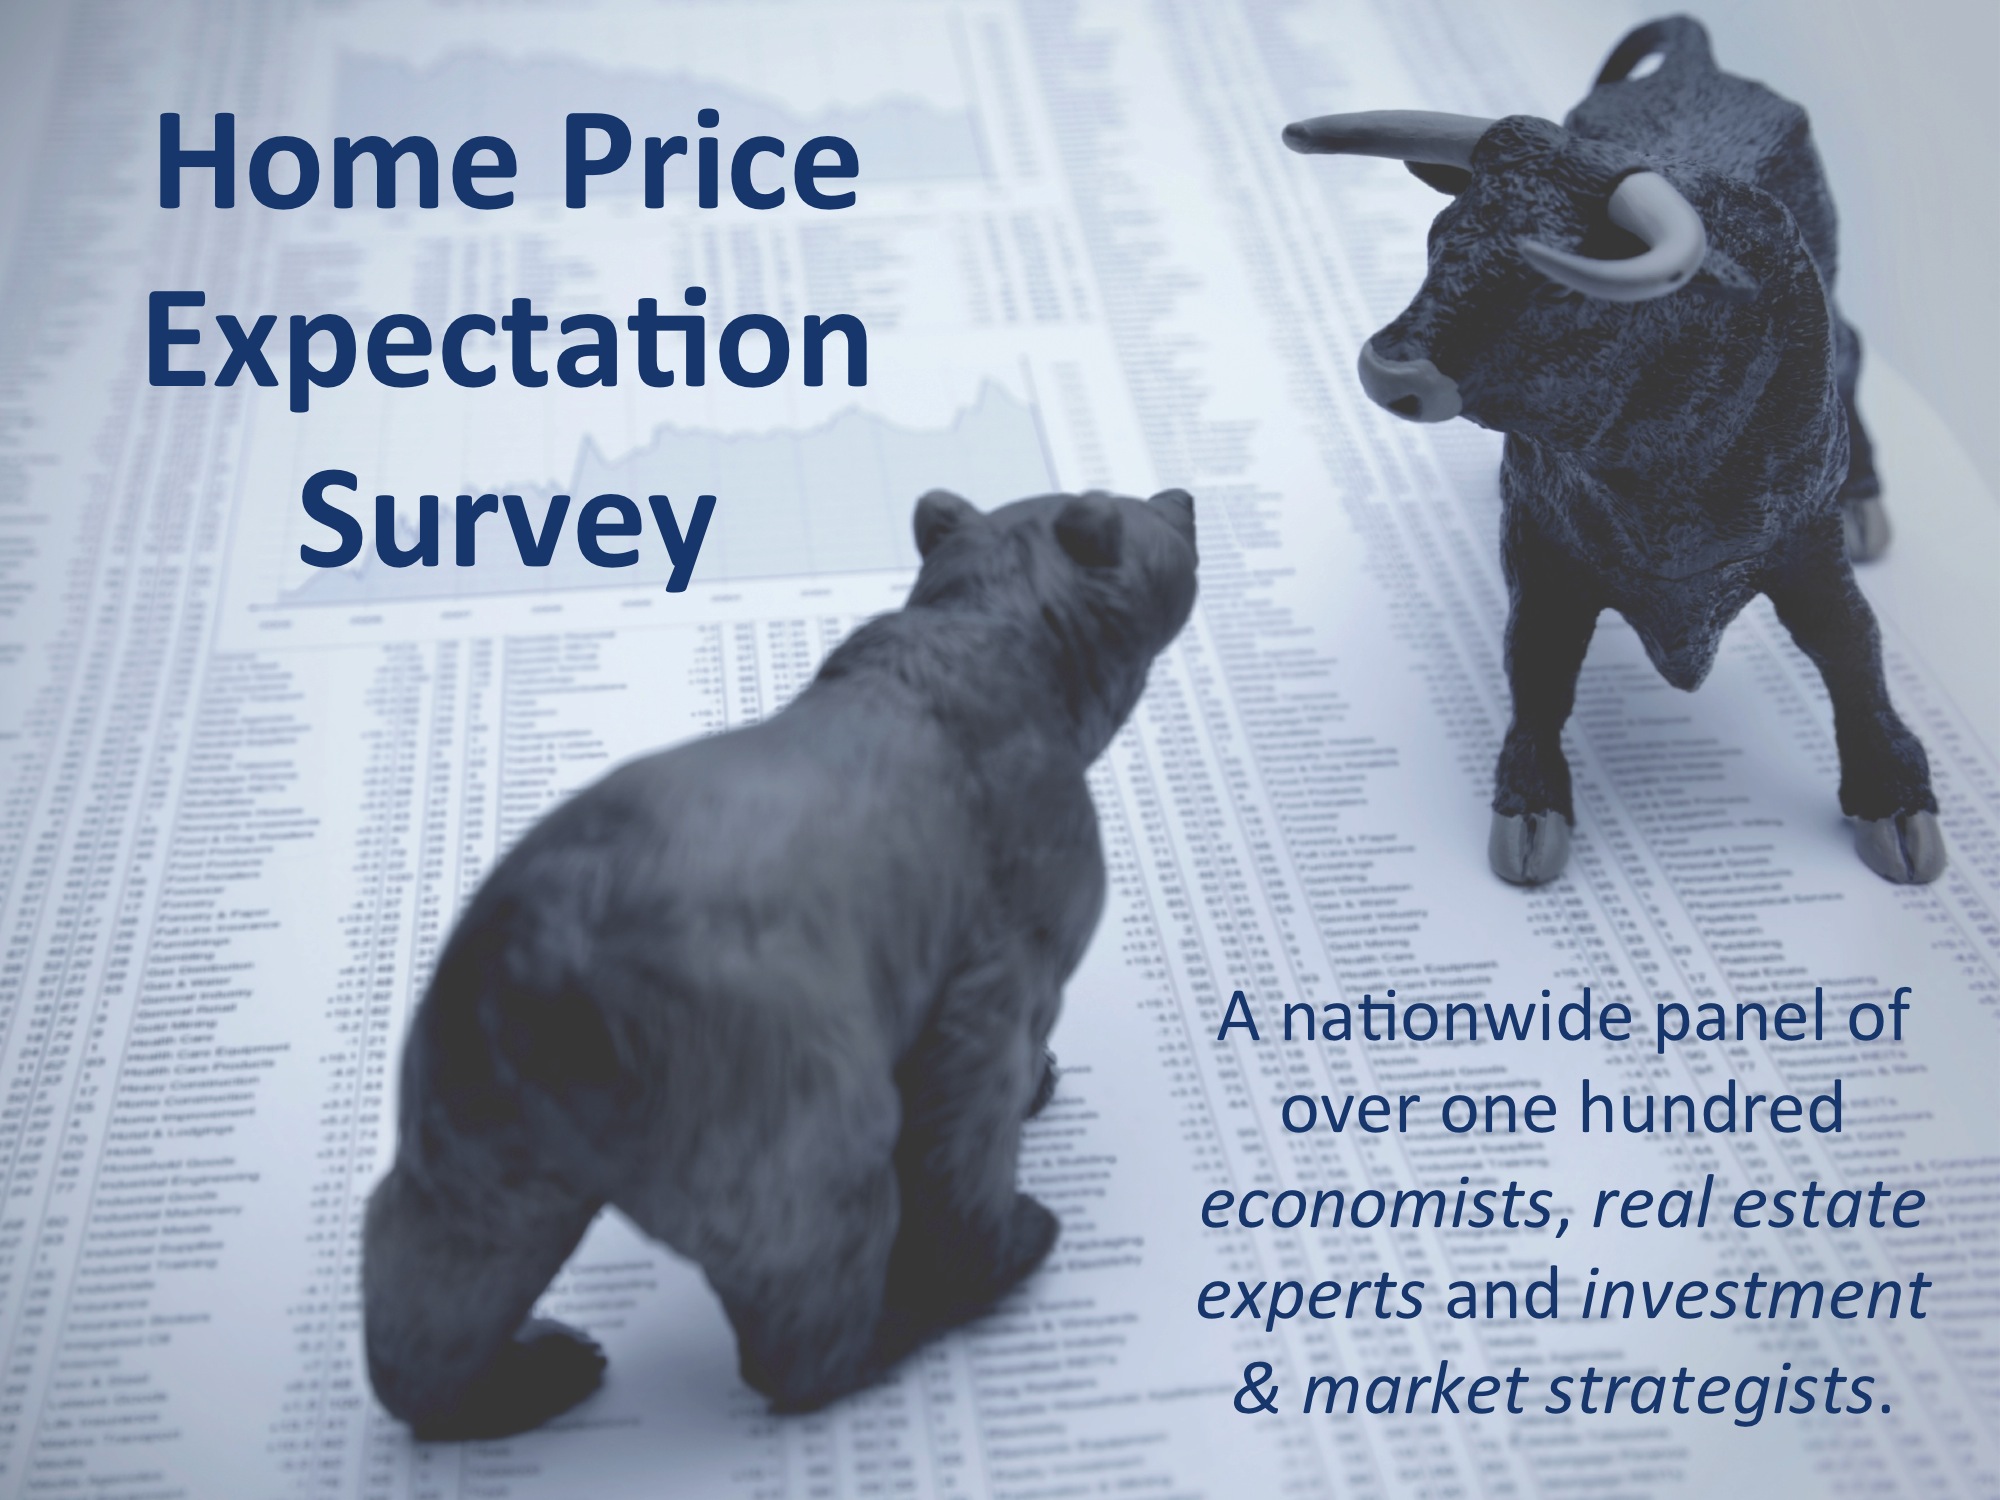 (English) Where Do The Experts Say Home Prices Are Going?